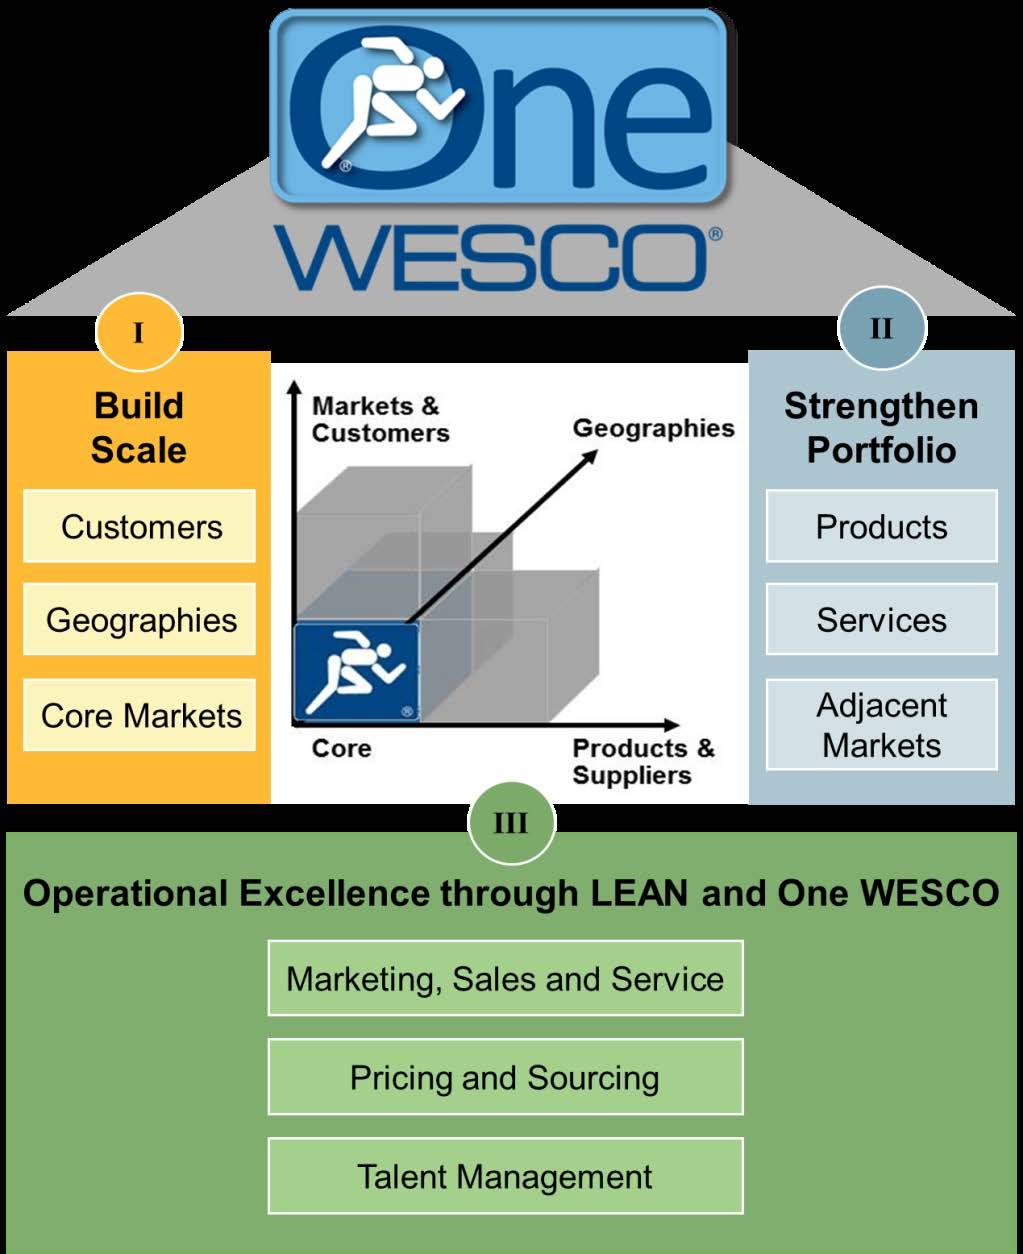 Growth Strategy Build Scale + Strengthen Portfolio + Operational Excellence through Lean and One WESCO Growth strategy launched 5 years ago Strong results delivered Market position Global